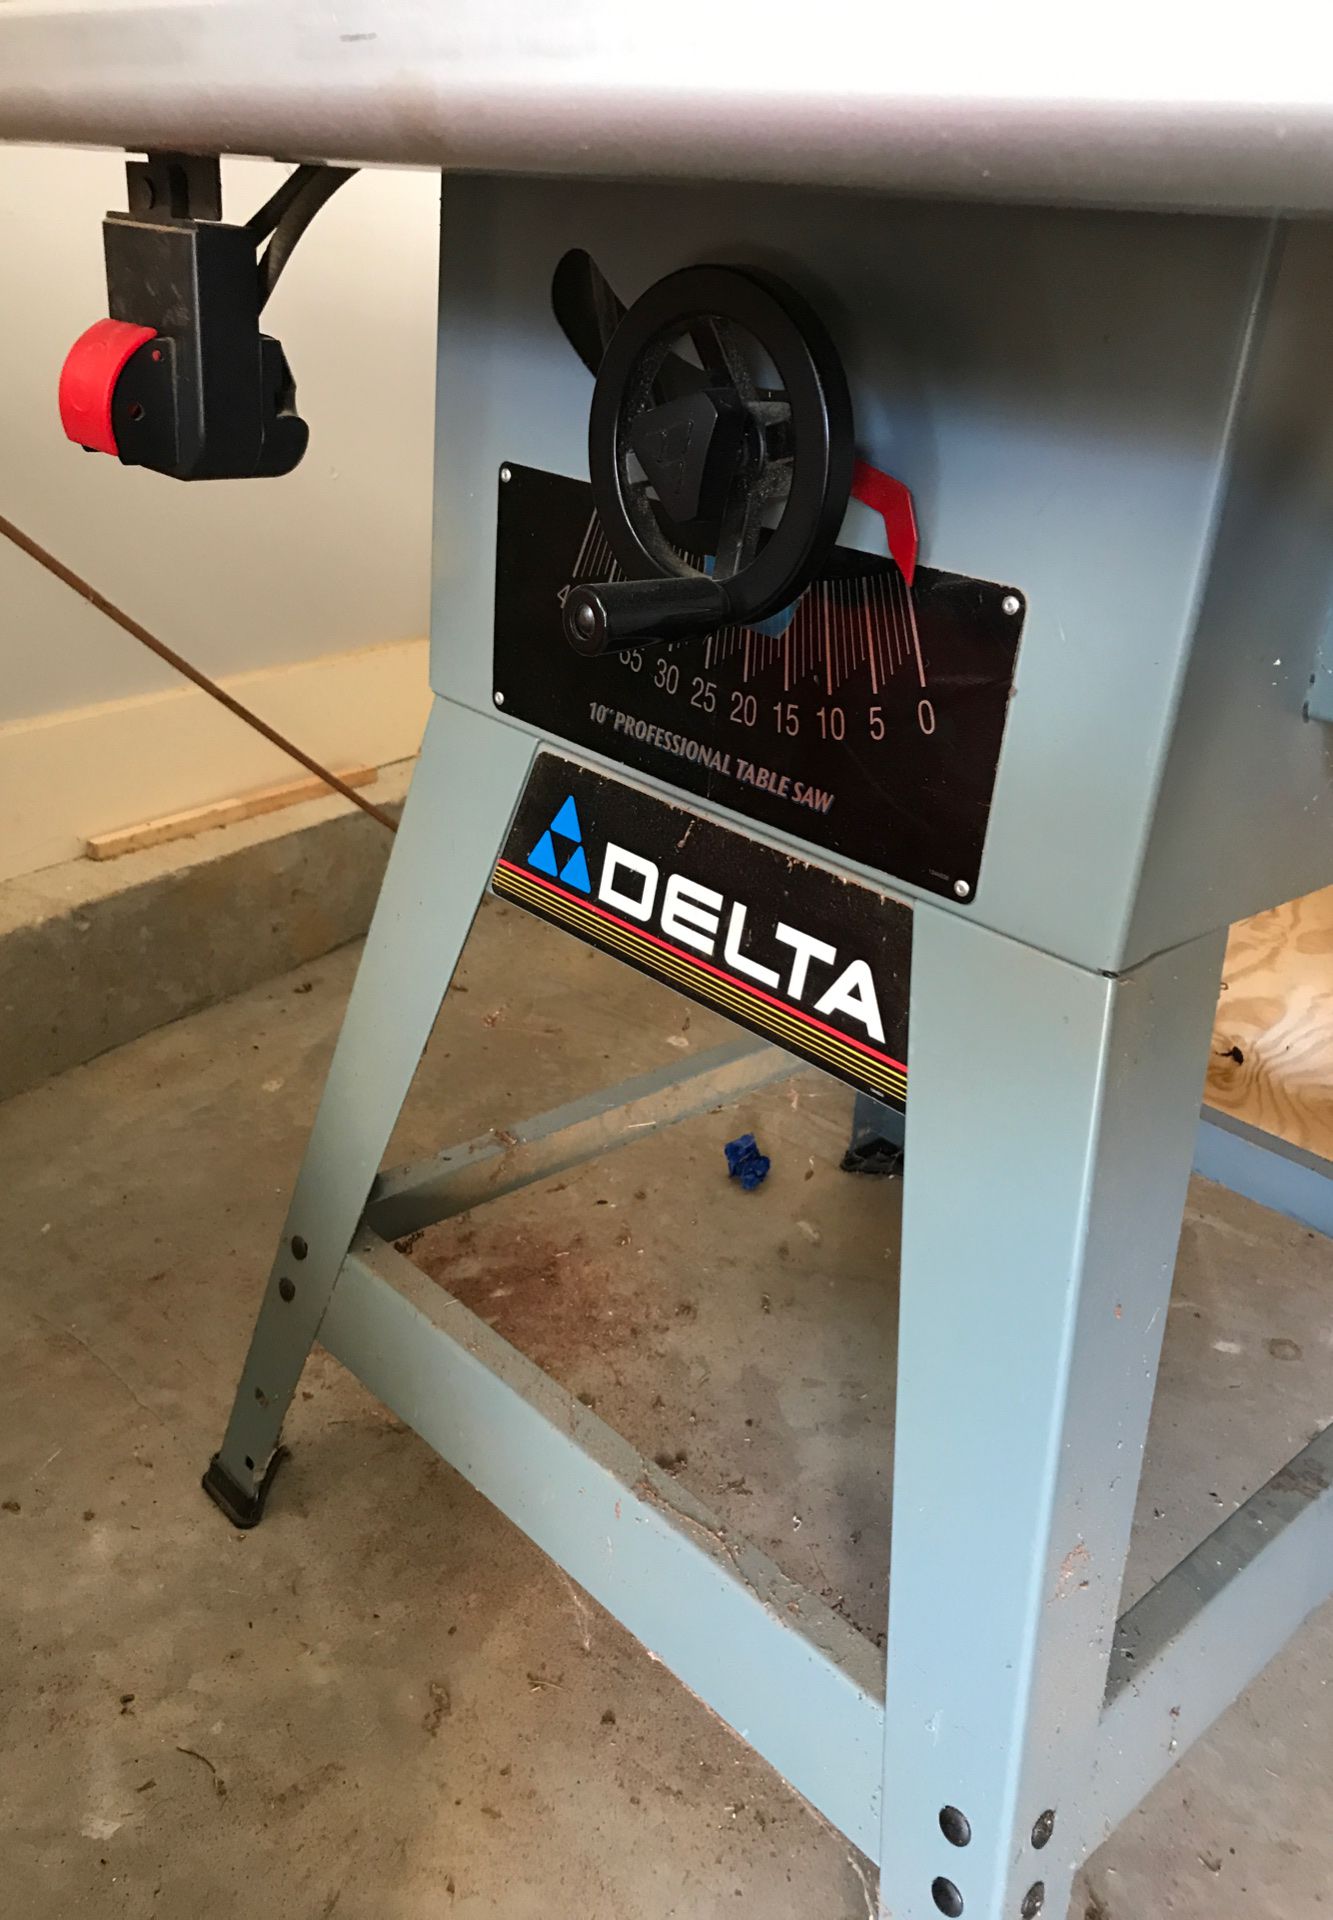 Delta 10” Professional Table Saw